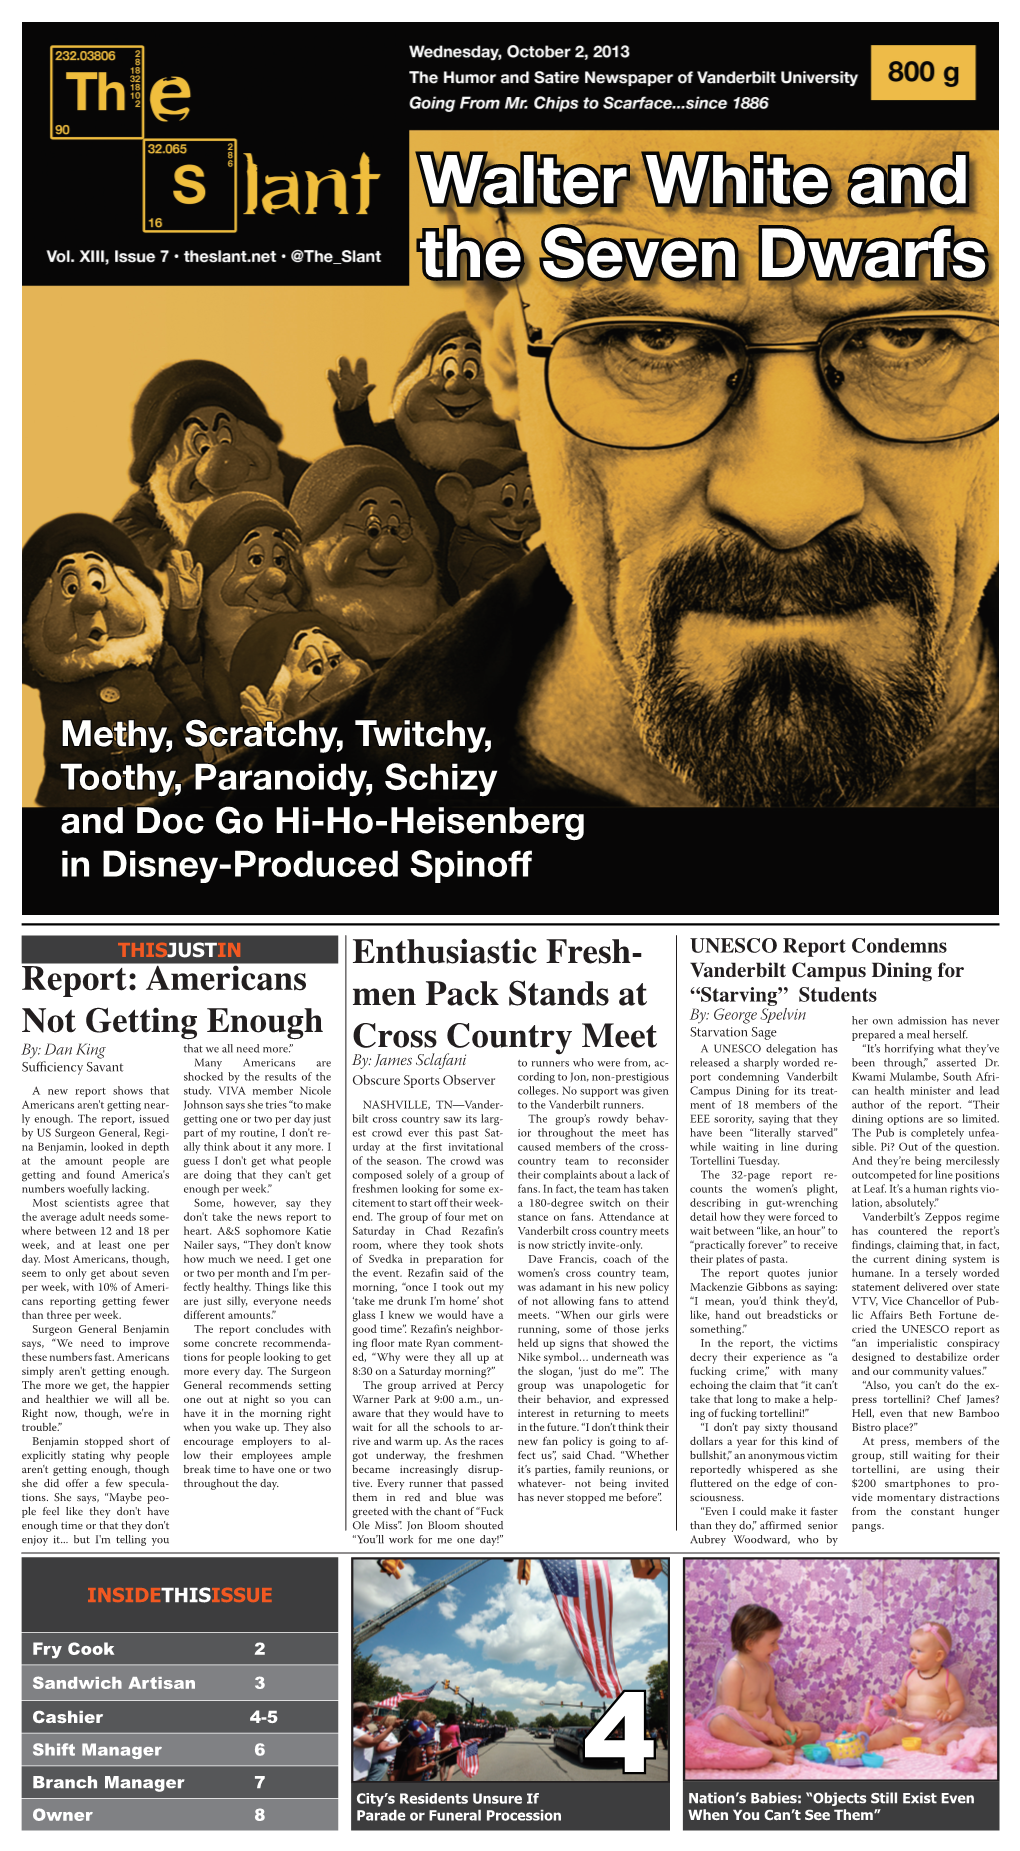 Walter White and the Seven Dwarfs